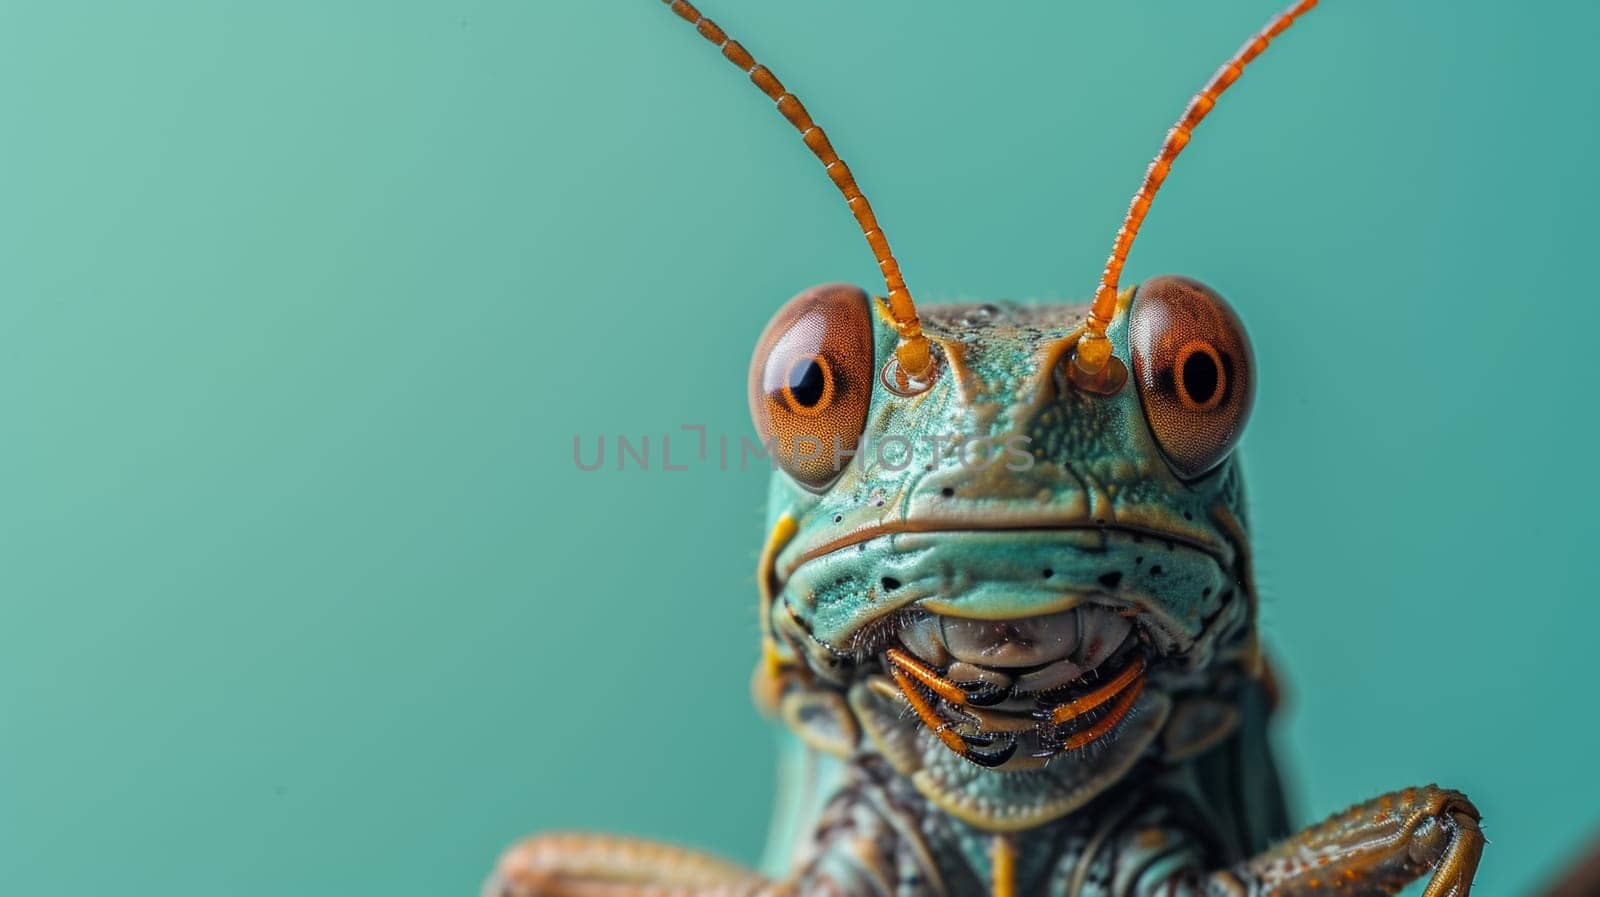 A close up of a grasshopper with orange eyes and antennae, AI by starush